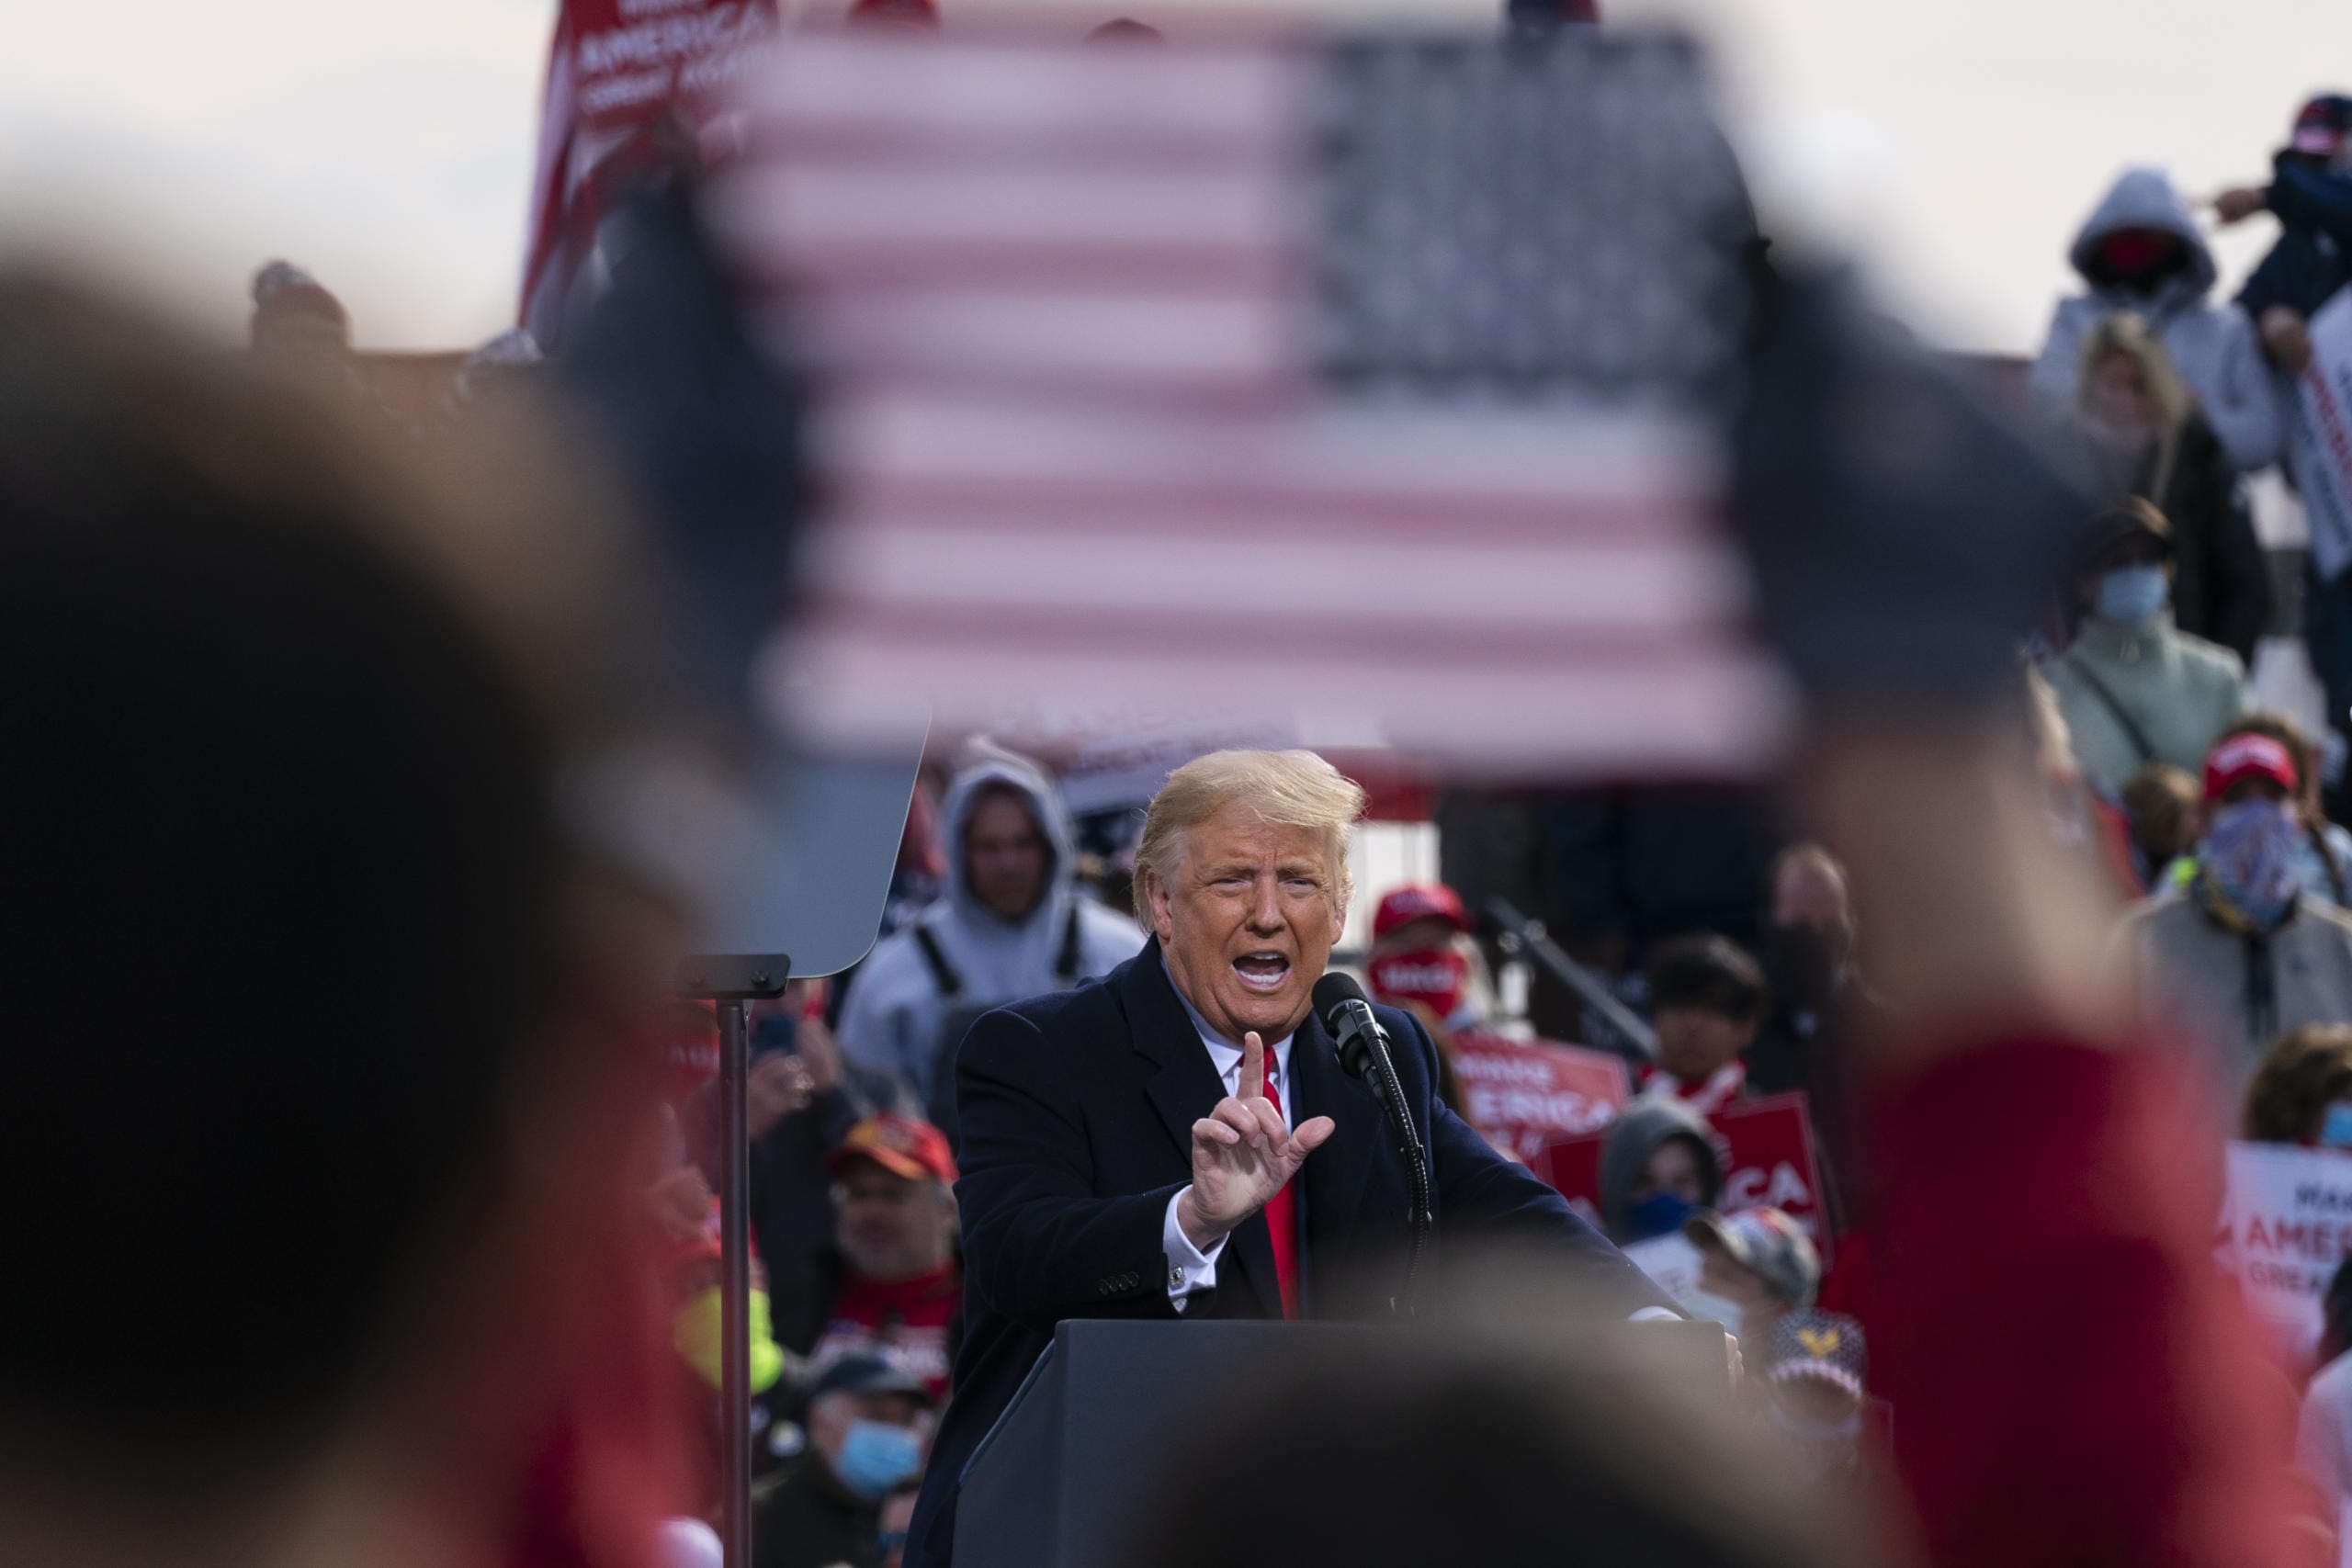 President Donald Trump speaks at a campaign rally at Manchester-Boston Regional Airport, Sunday, Oct. 25, 2020, in Londonderry, N.H.